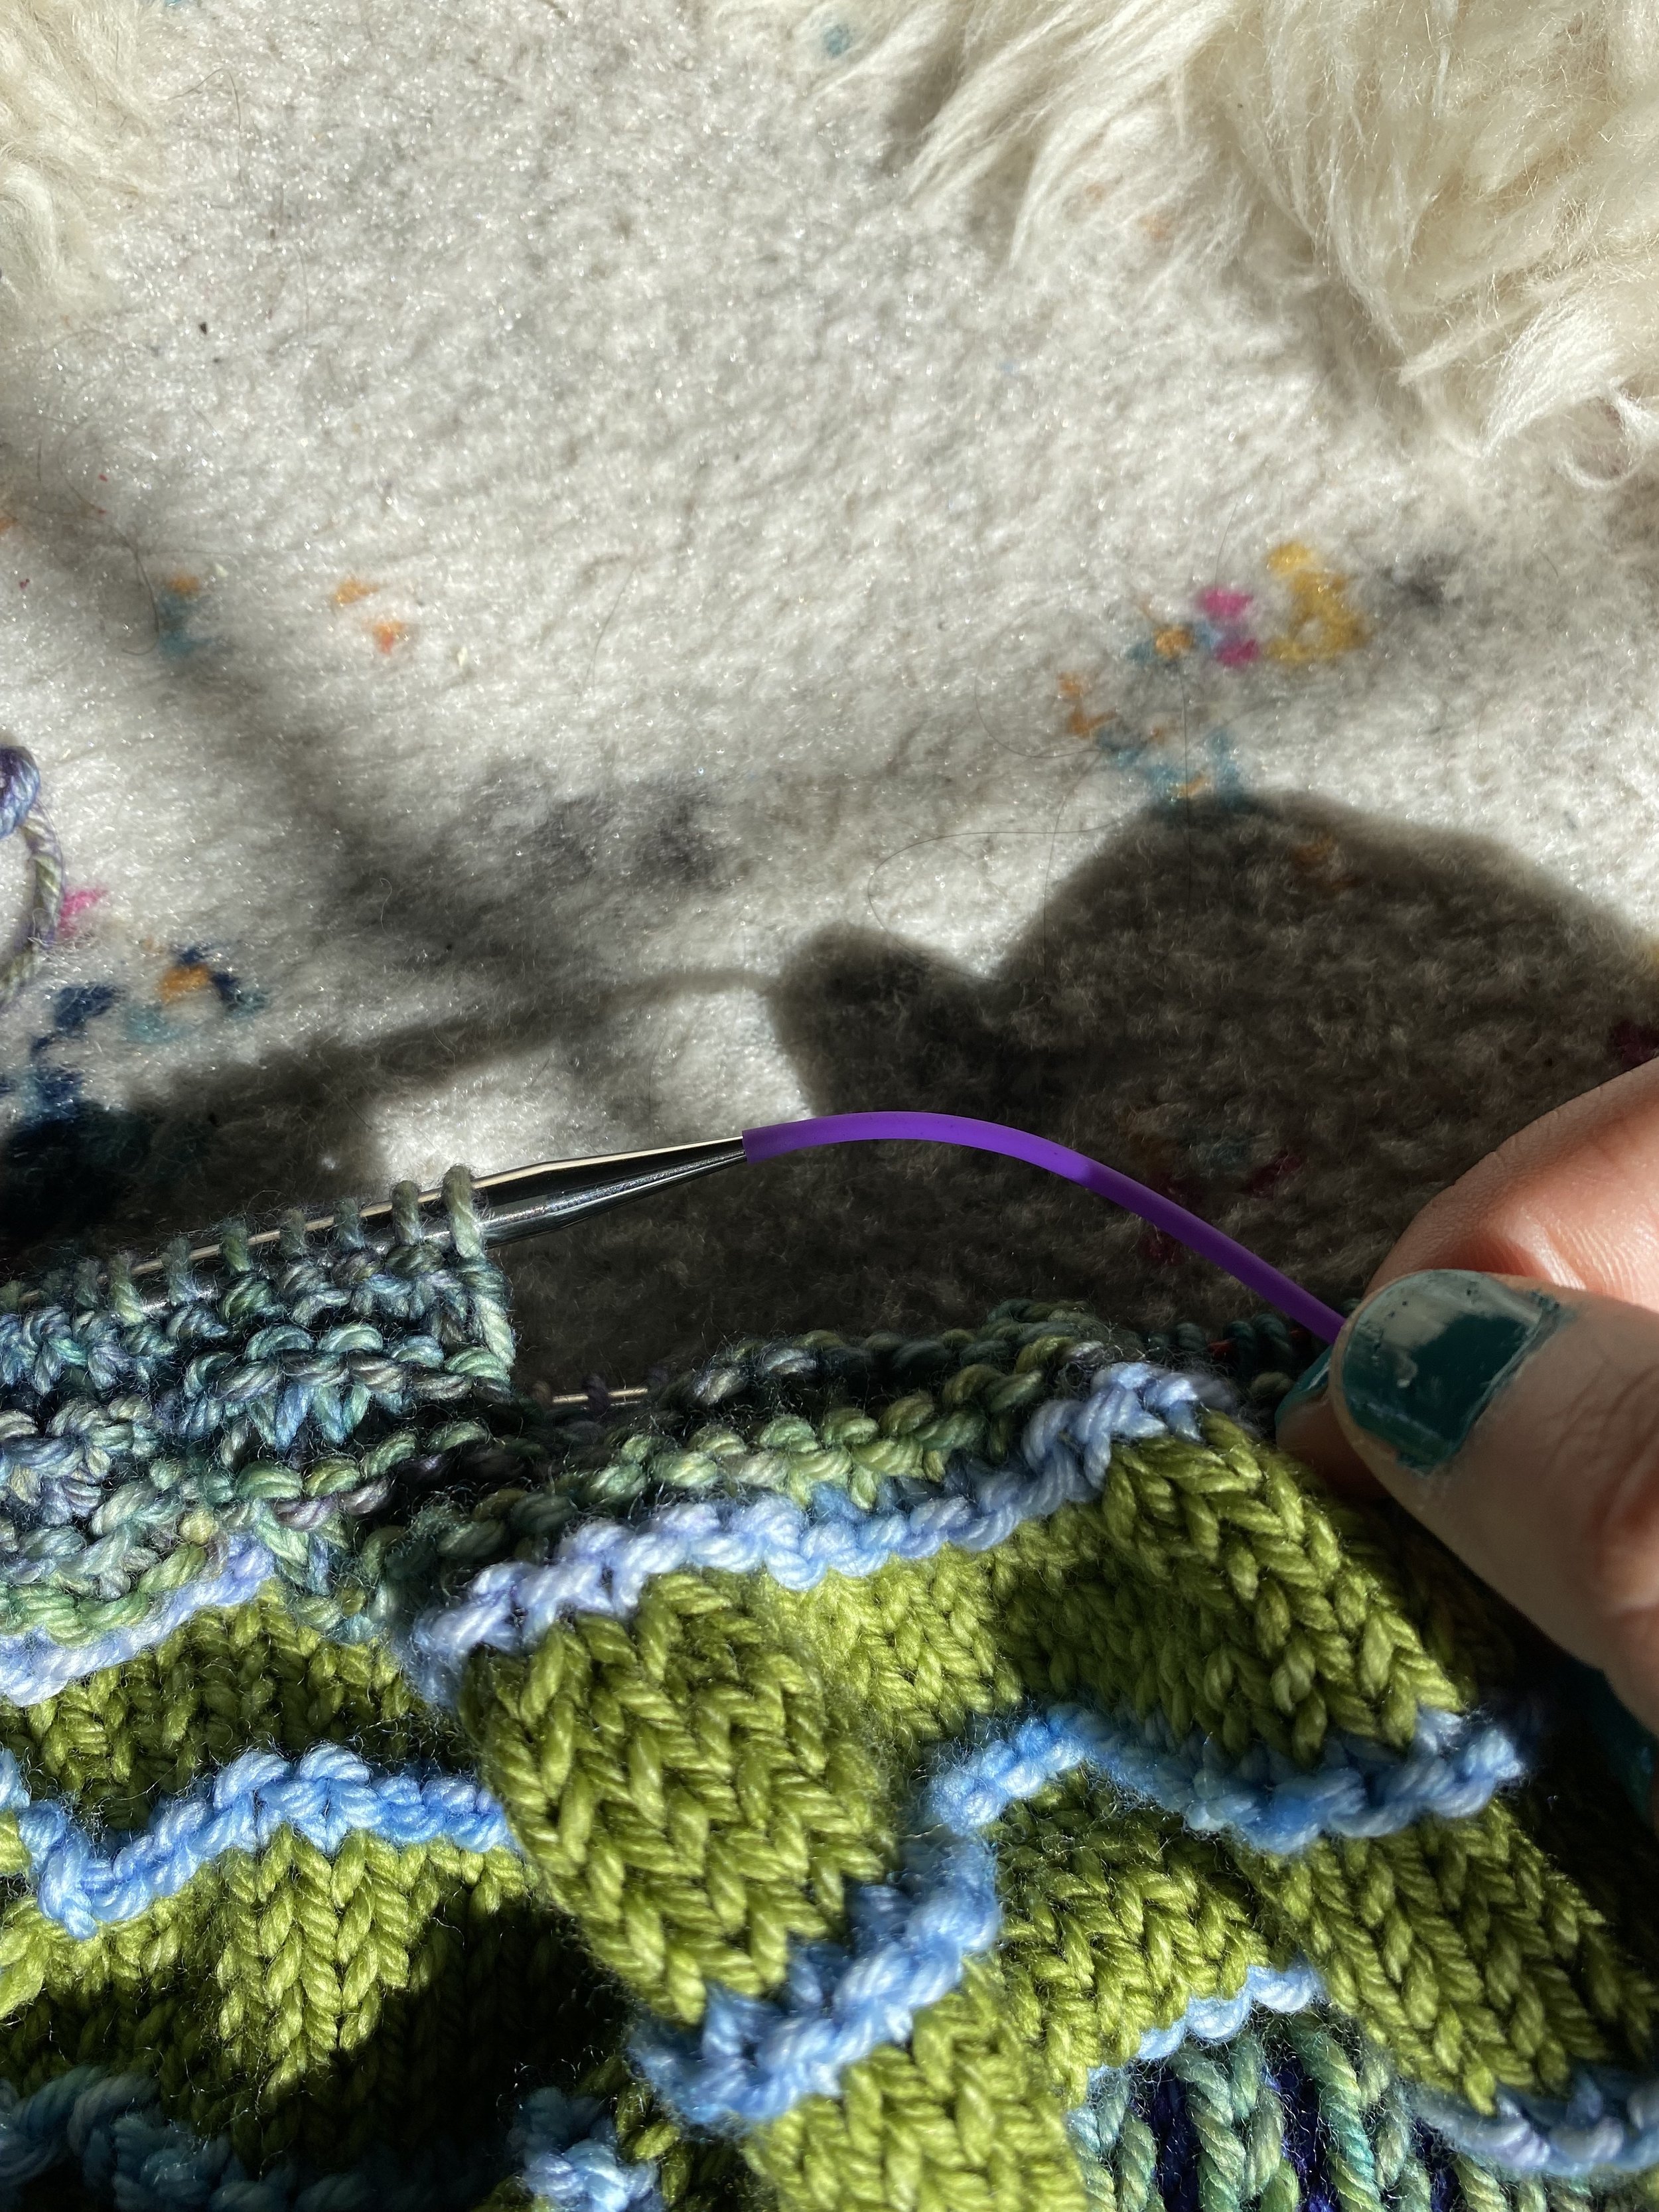 The Knitting Barber Cords: Why I was wrong and why they're awesome (and how  to use them) — Circle of Stitches